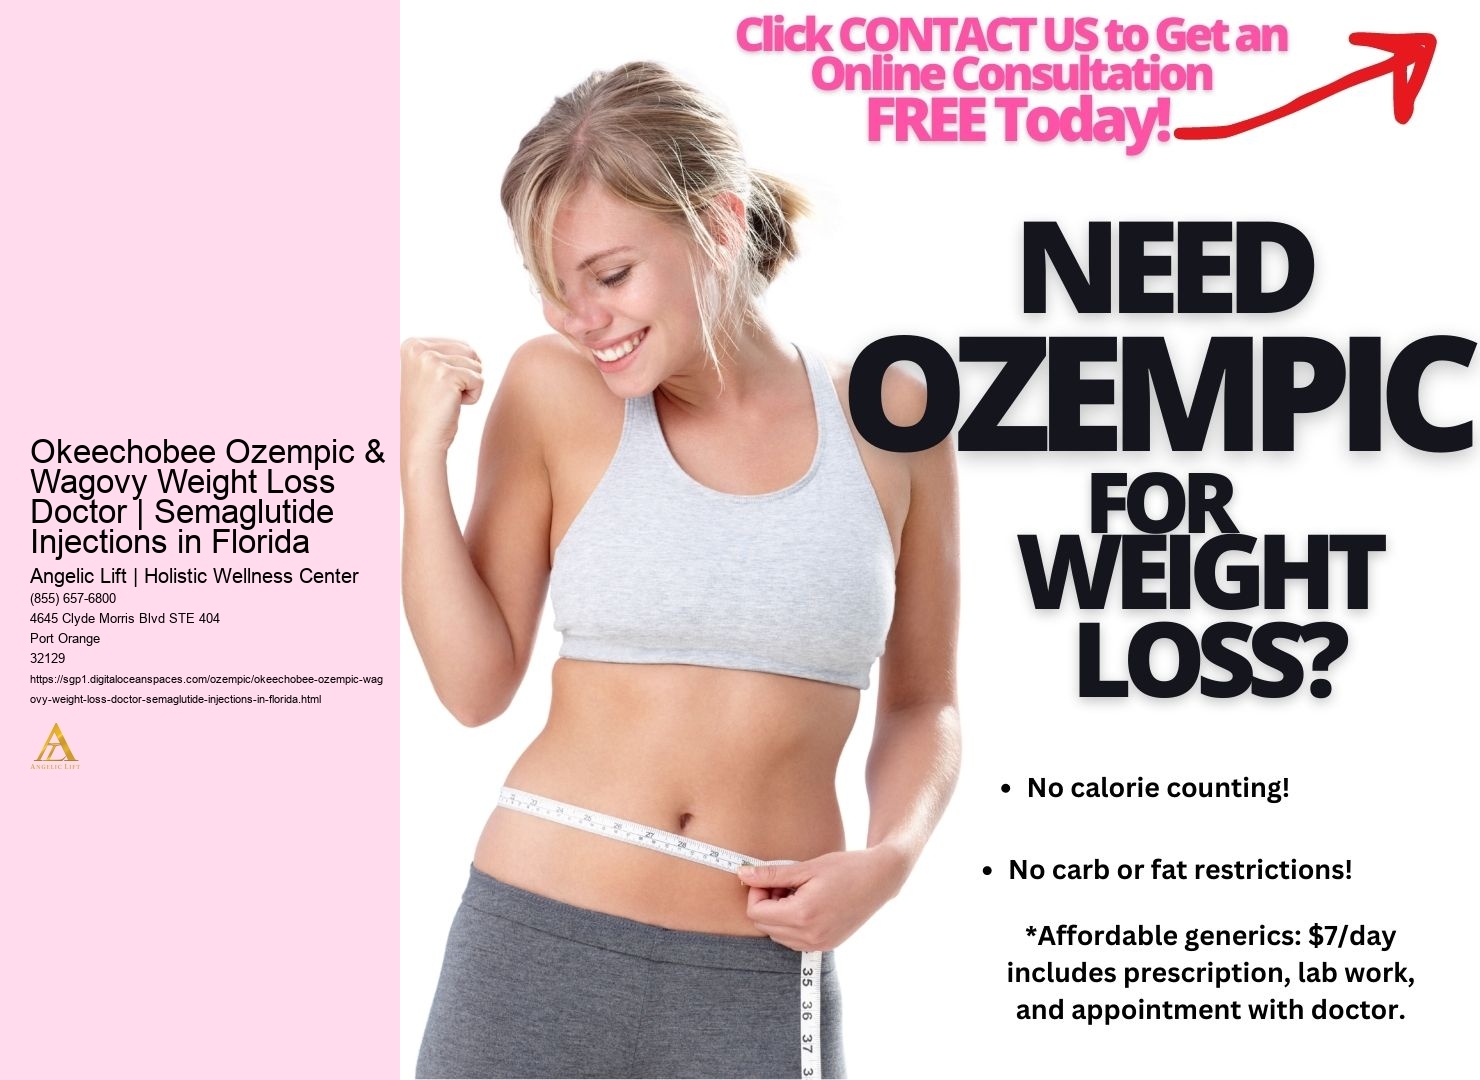 Okeechobee Ozempic & Wagovy Weight Loss Doctor | Semaglutide Injections in Florida